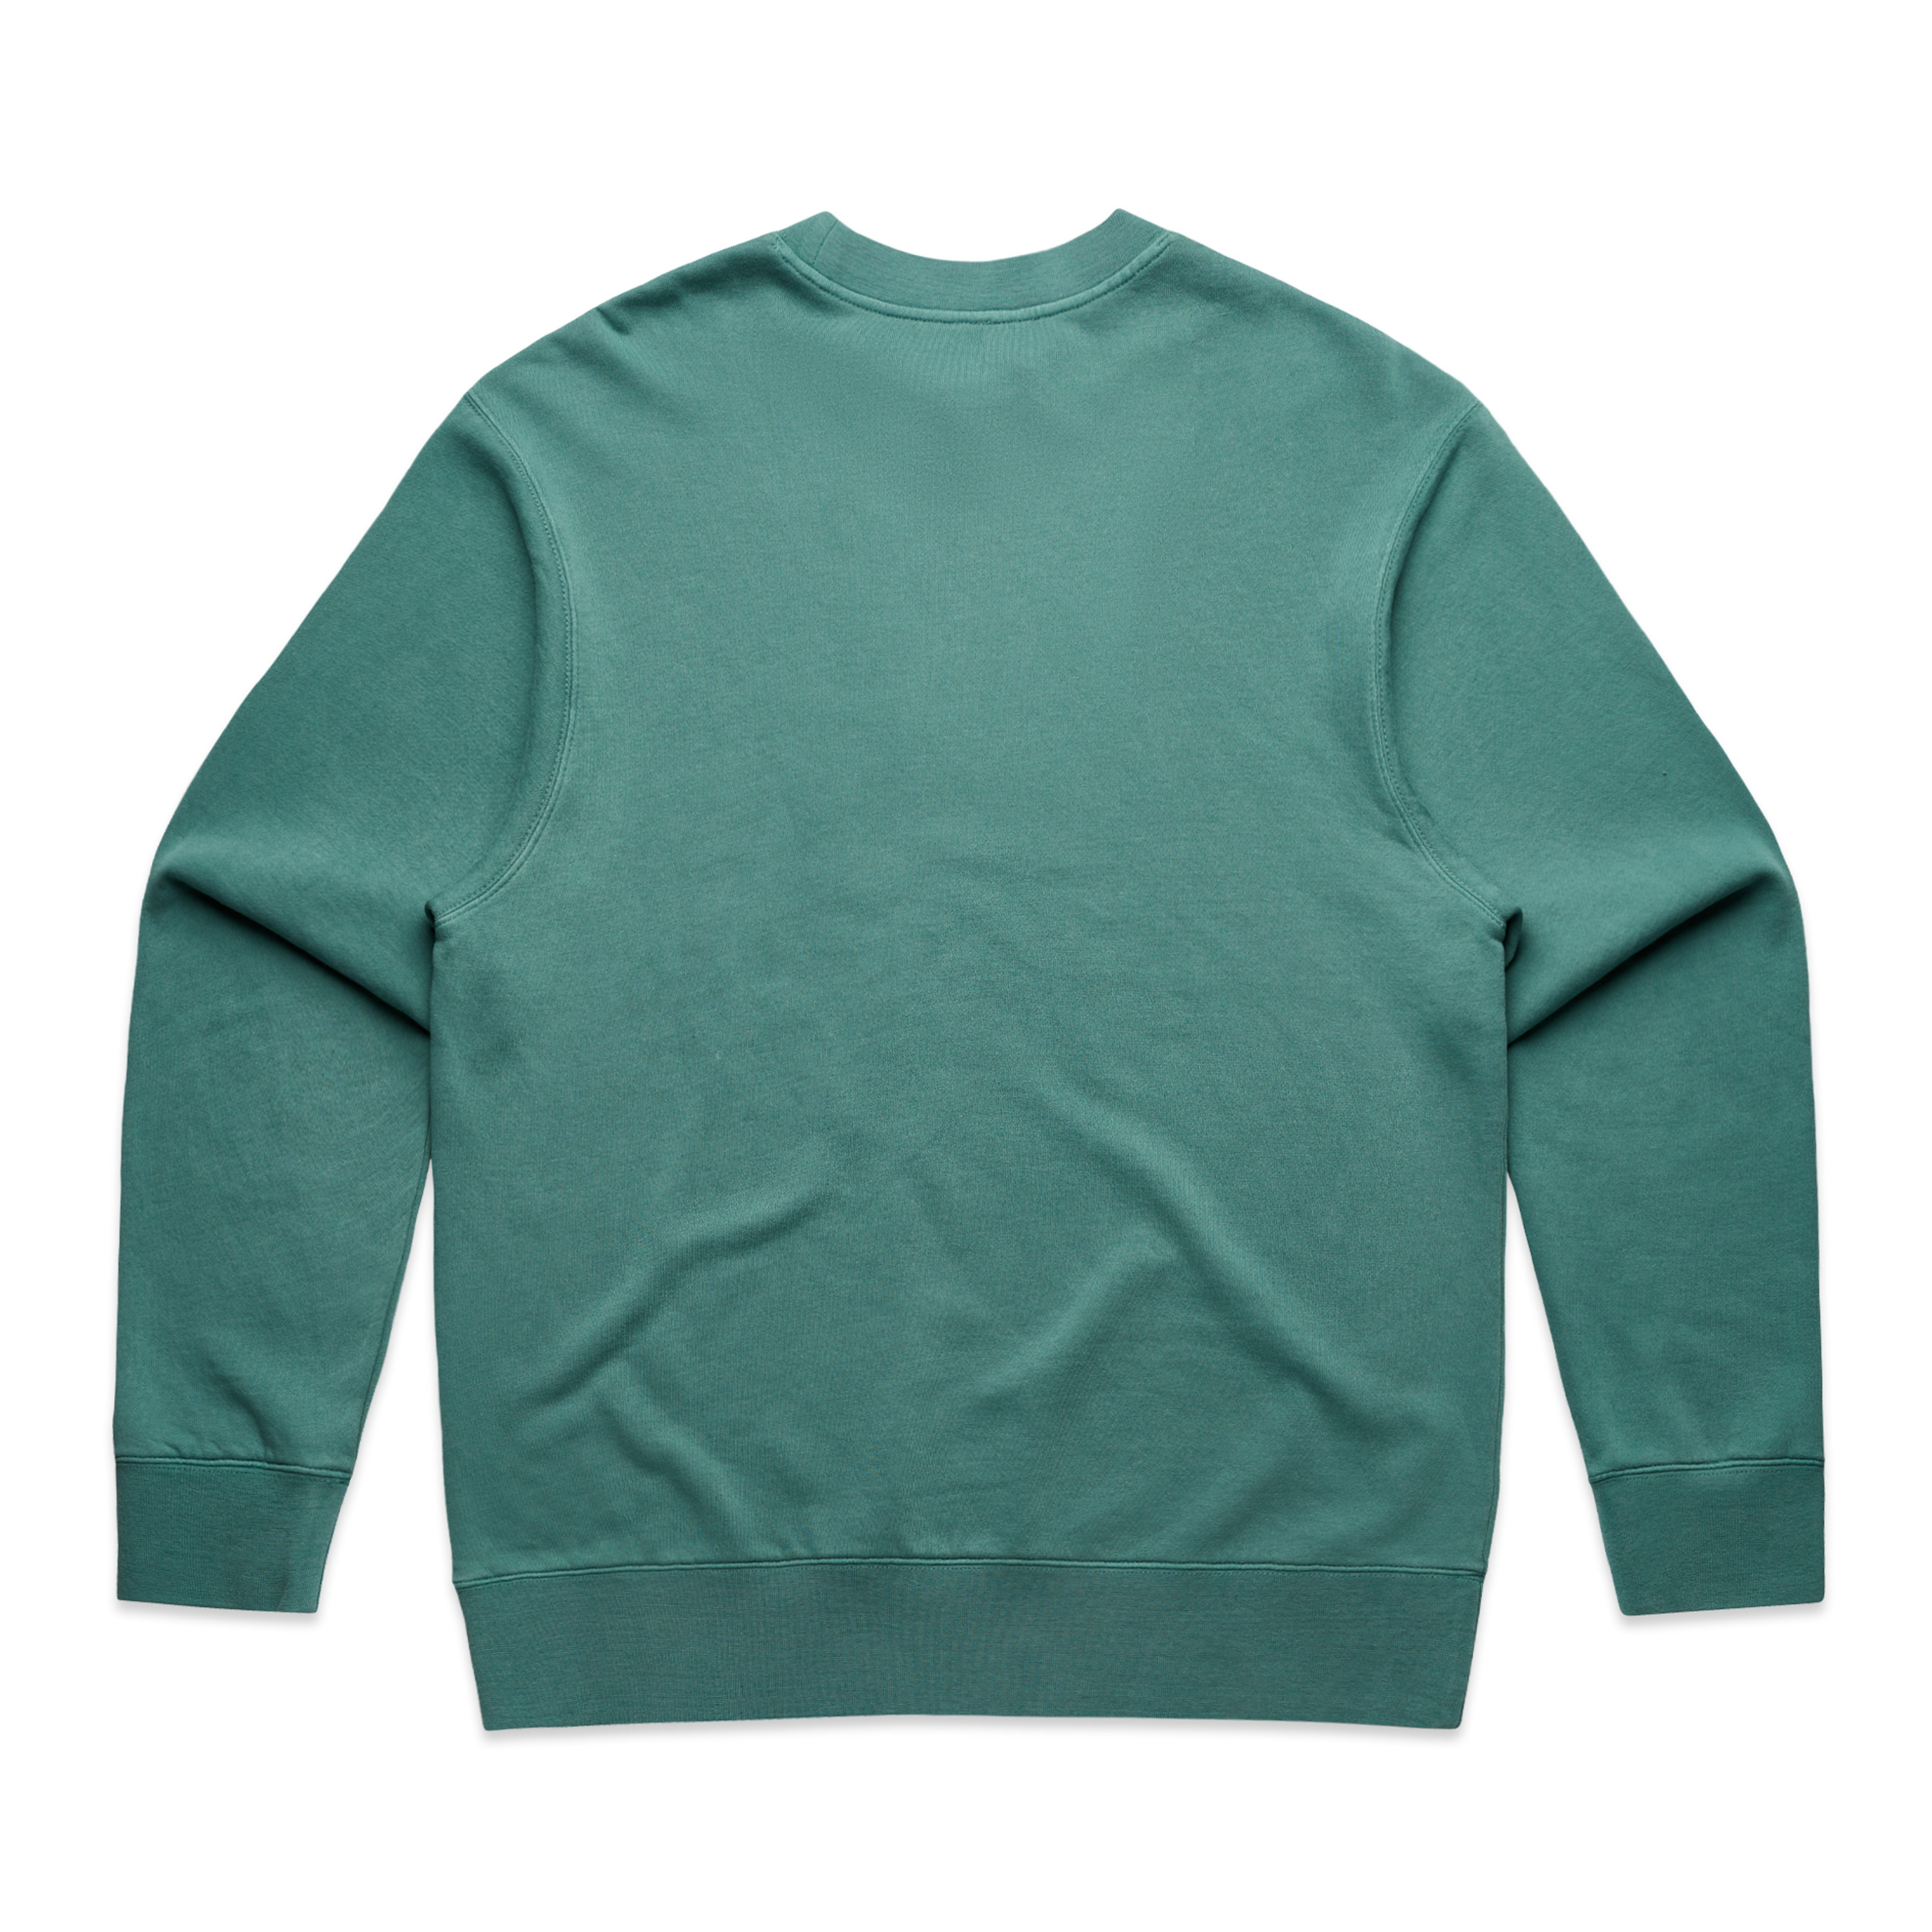 FADED TEAL - BACK